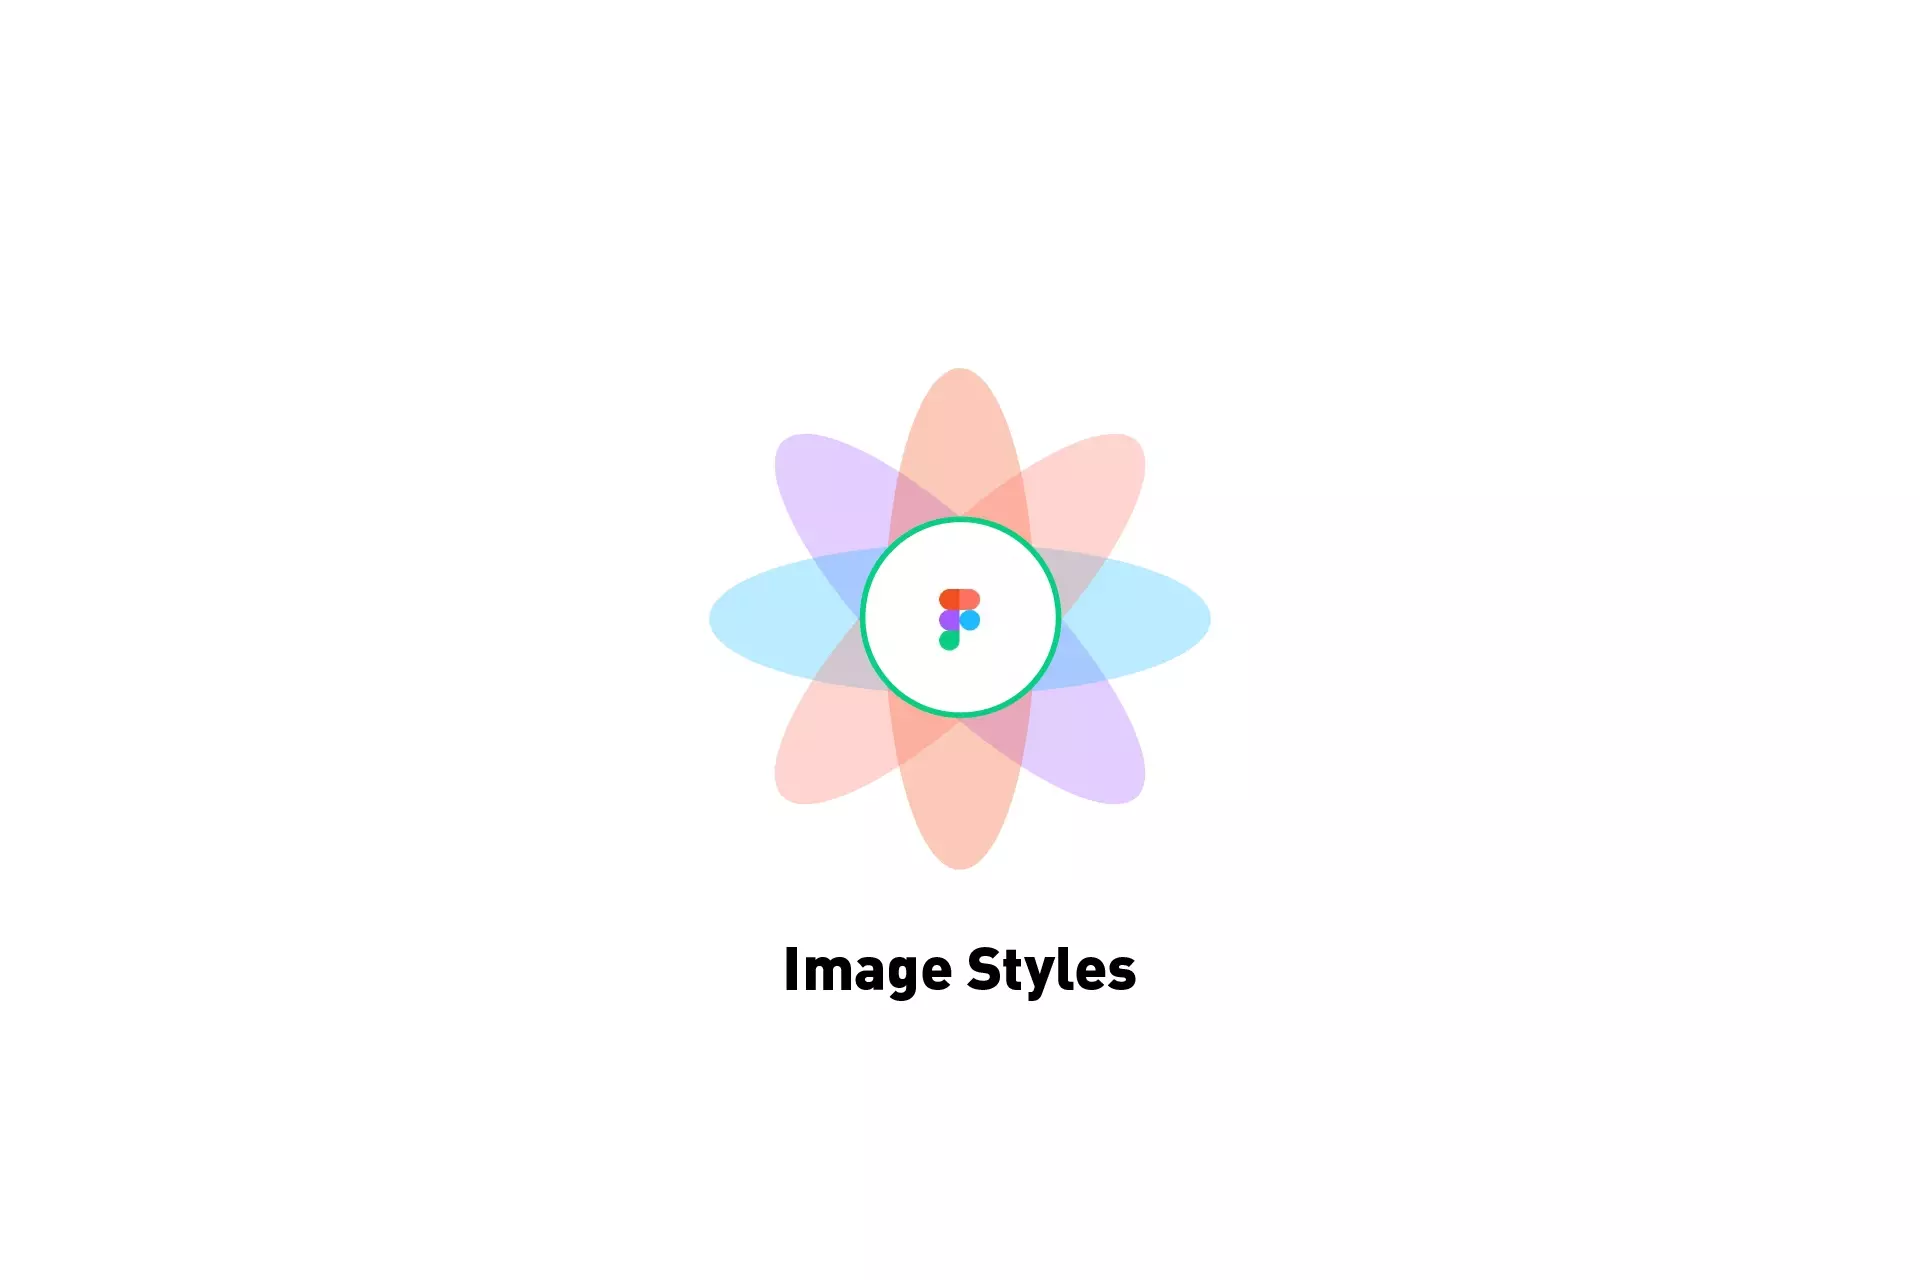 A flower that represents Figma with the text "Image Styles" beneath it.